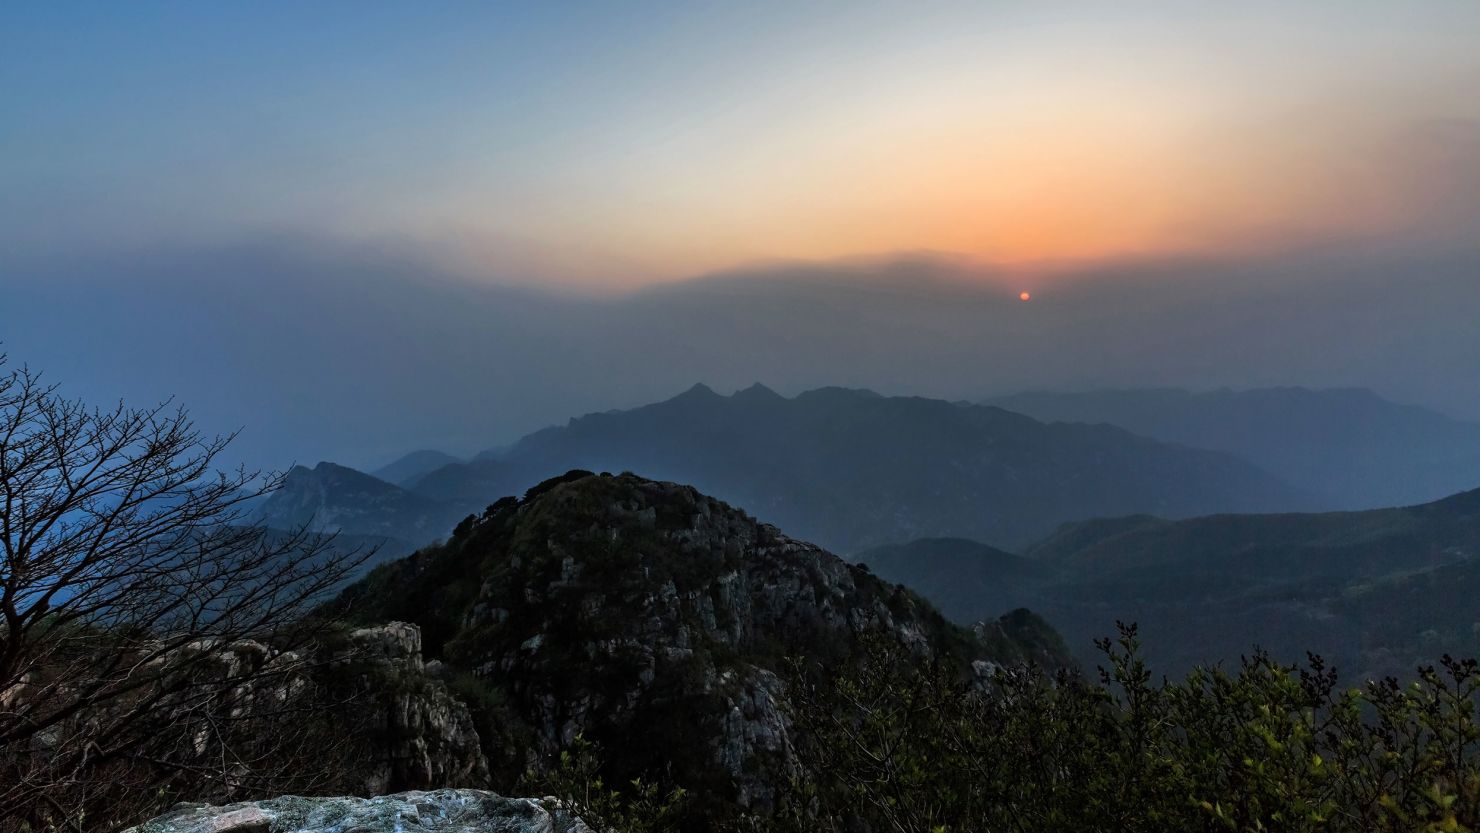 May 23, 2018 - Tai'An, Tai'an, China - Tai'an, CHINA-23rd May 2018: Sunset scenery at Mount Tai in Tai'an, east China's Shandong Province. Mount Tai is a mountain of historical and cultural significance located north of the city of Tai'an, in Shandong province, China. (Credit Image: © SIPA Asia via ZUMA Wire)